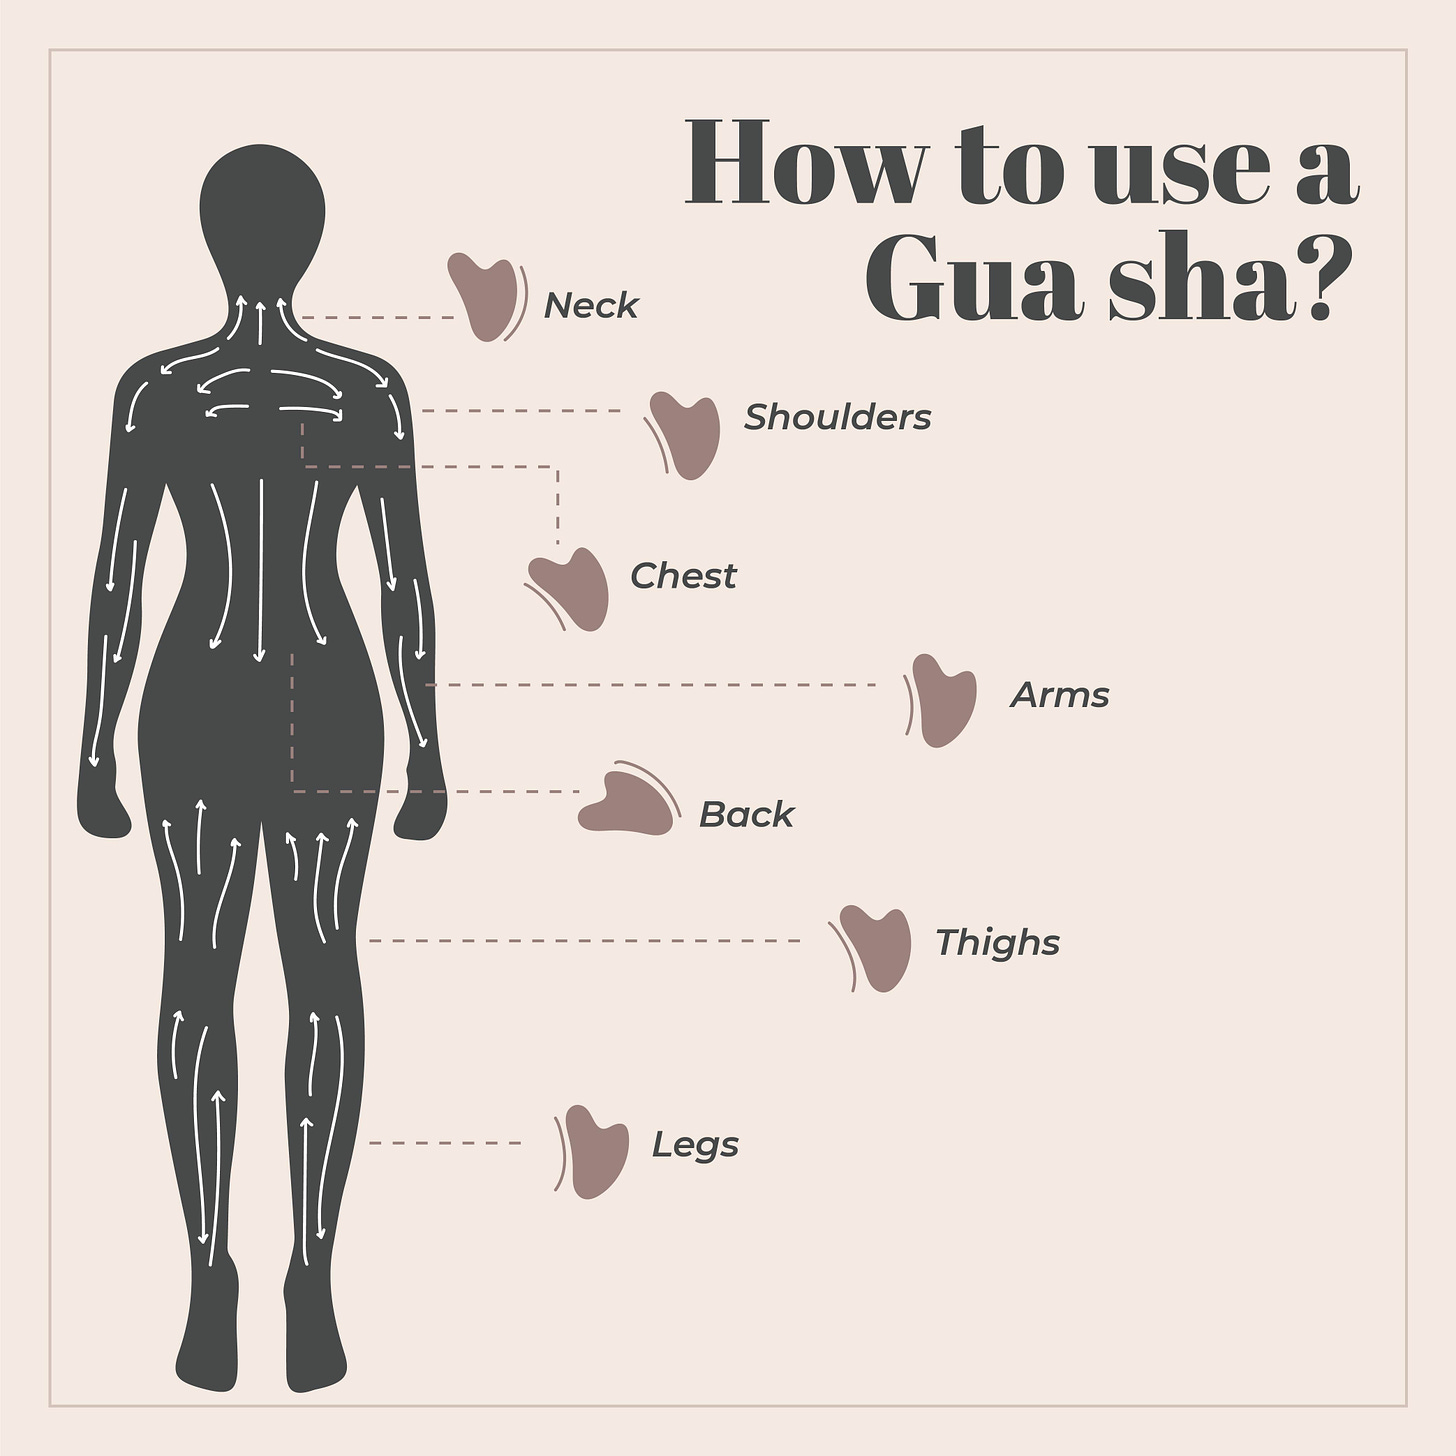 This is an image of how to use gua sha